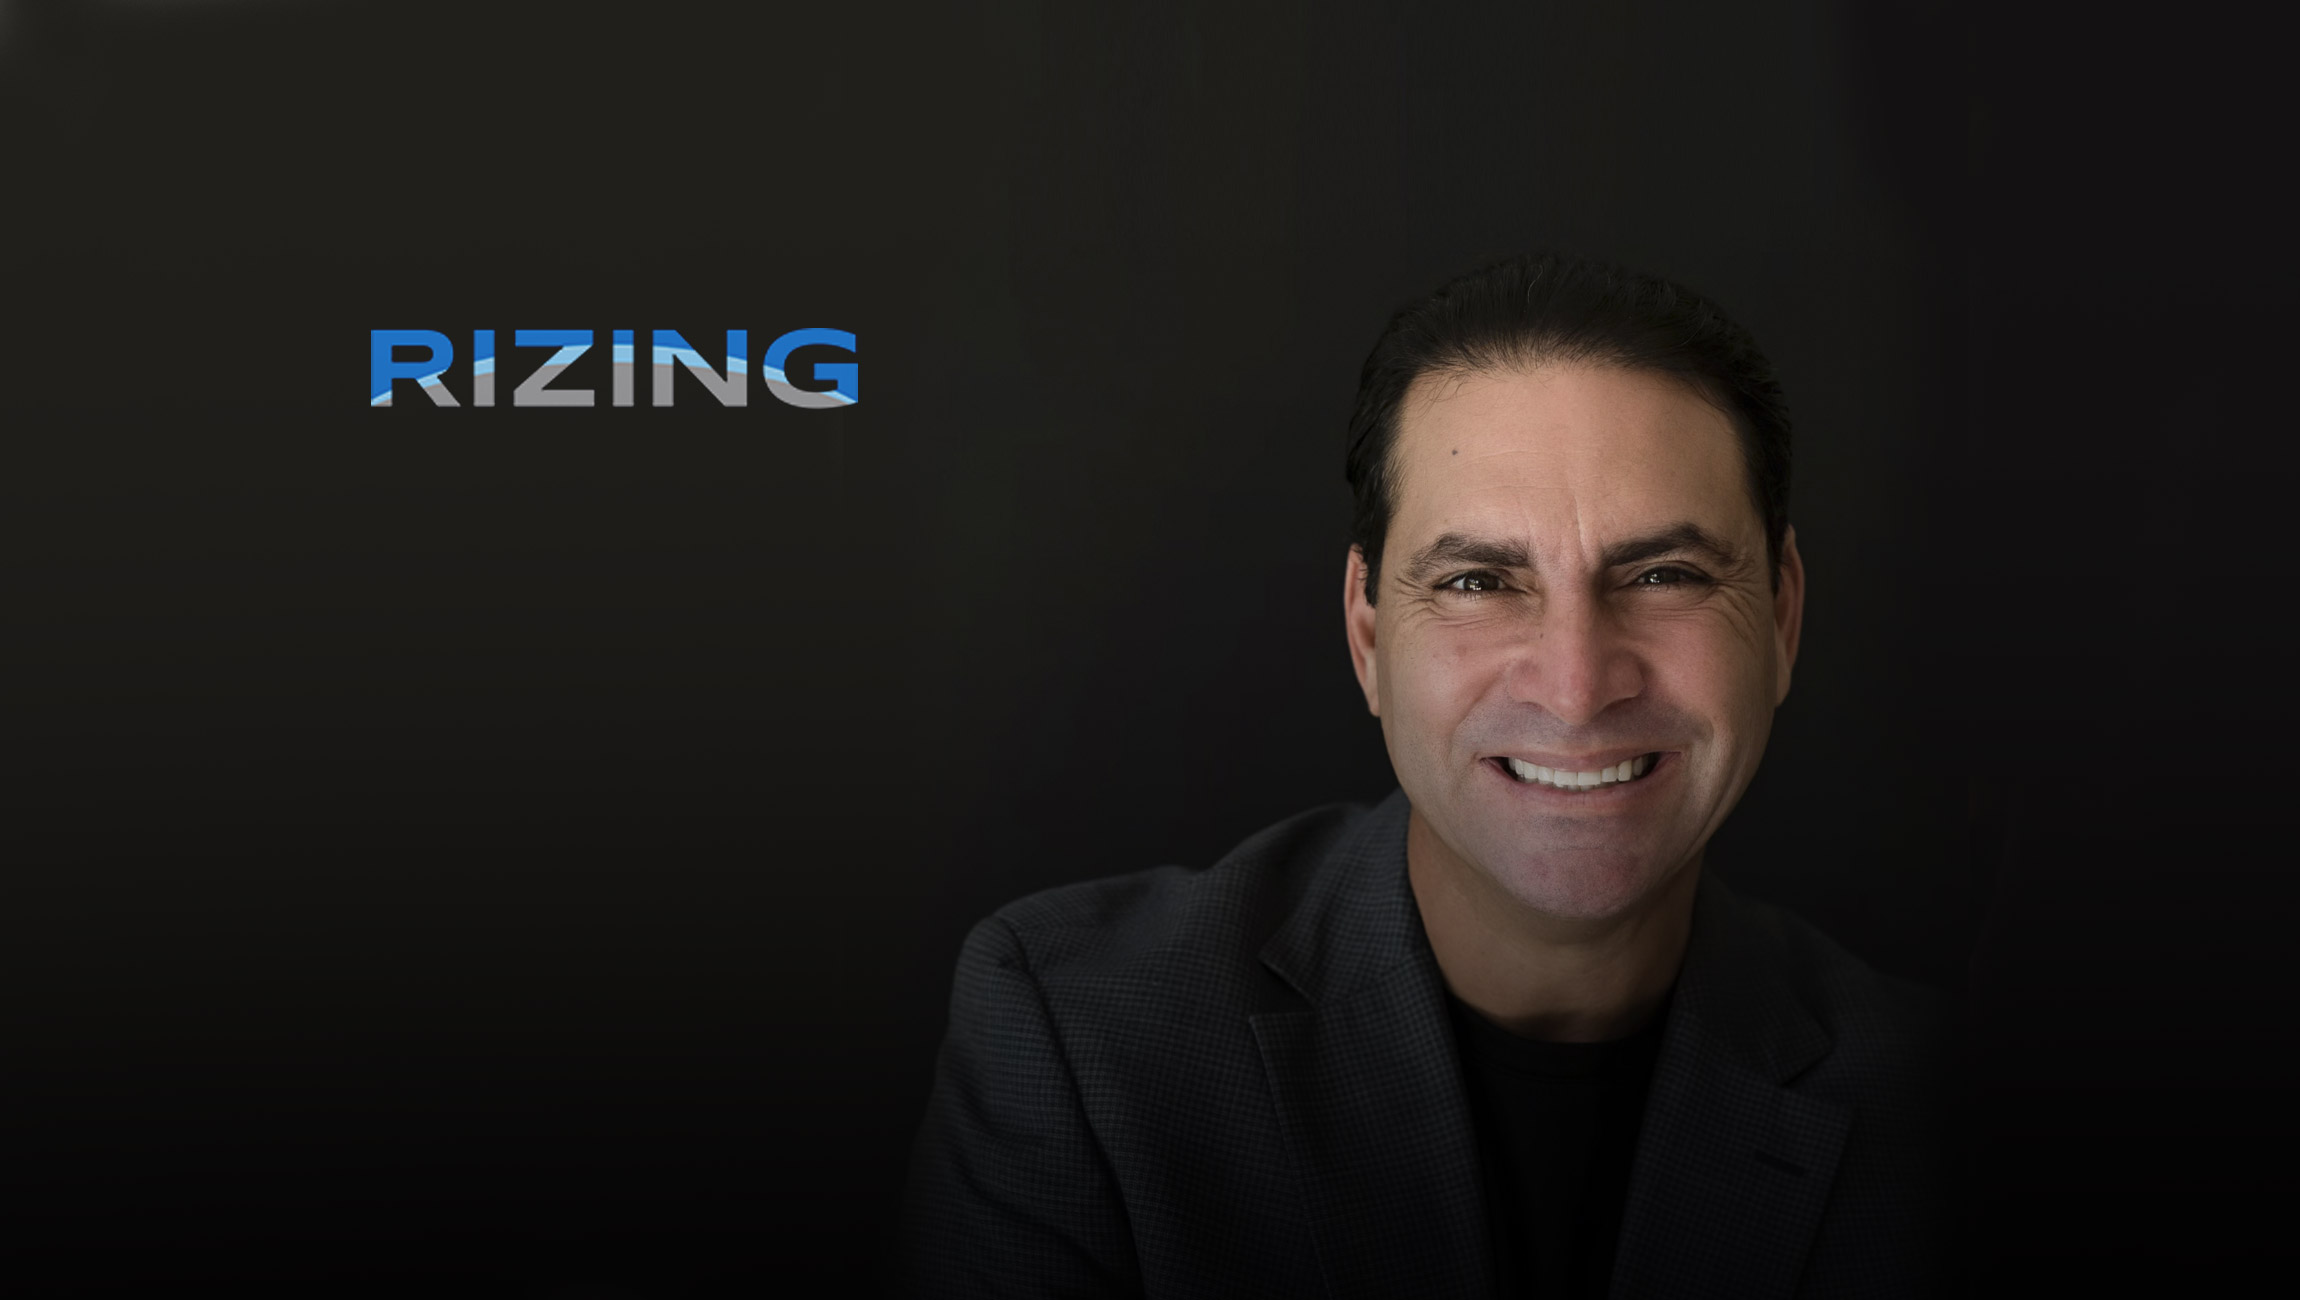 Juan Albelo Joins Rizing as Head of Sales for Rizing's Sap HCM Business